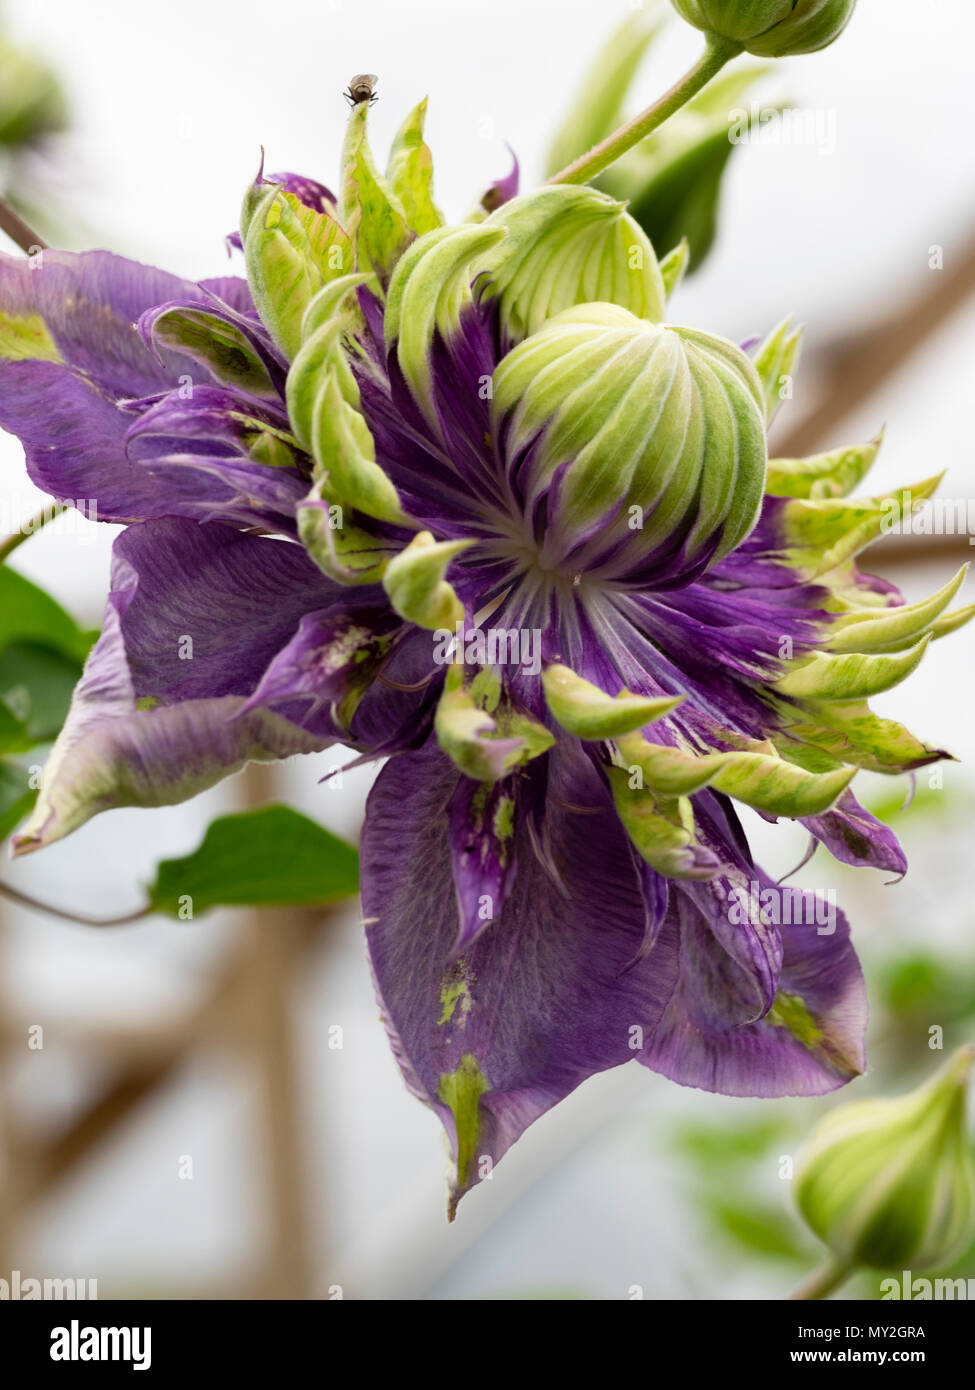 Purple double flower with green tipped petals of the hardy climber, Clematis florida 'Taiga' Stock Photo